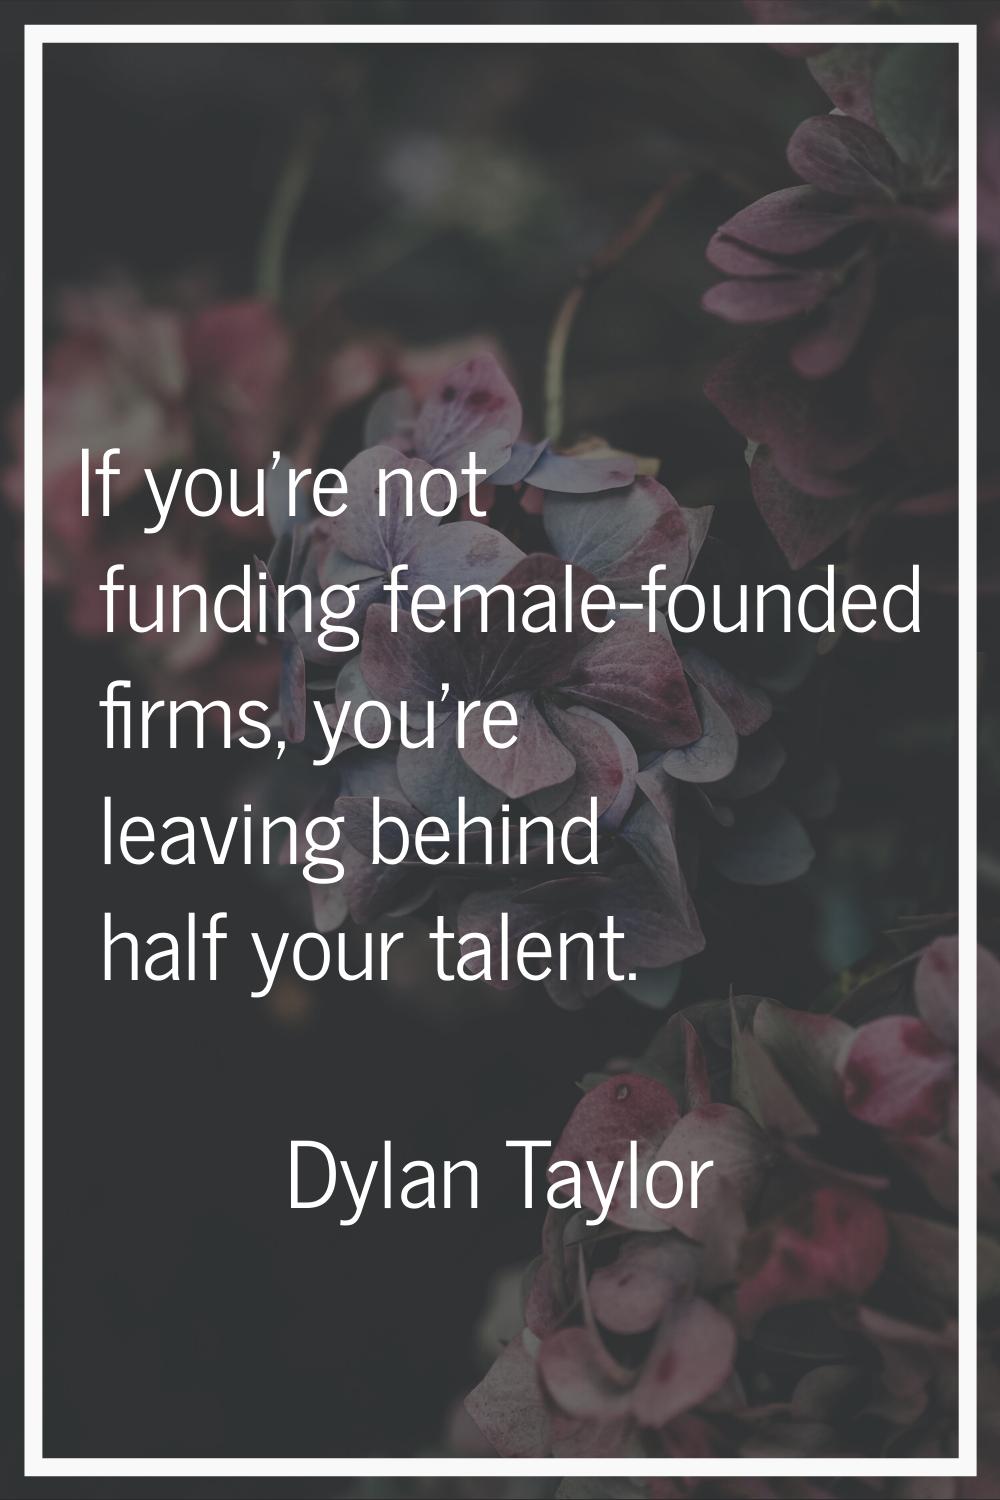 If you're not funding female-founded firms, you're leaving behind half your talent.